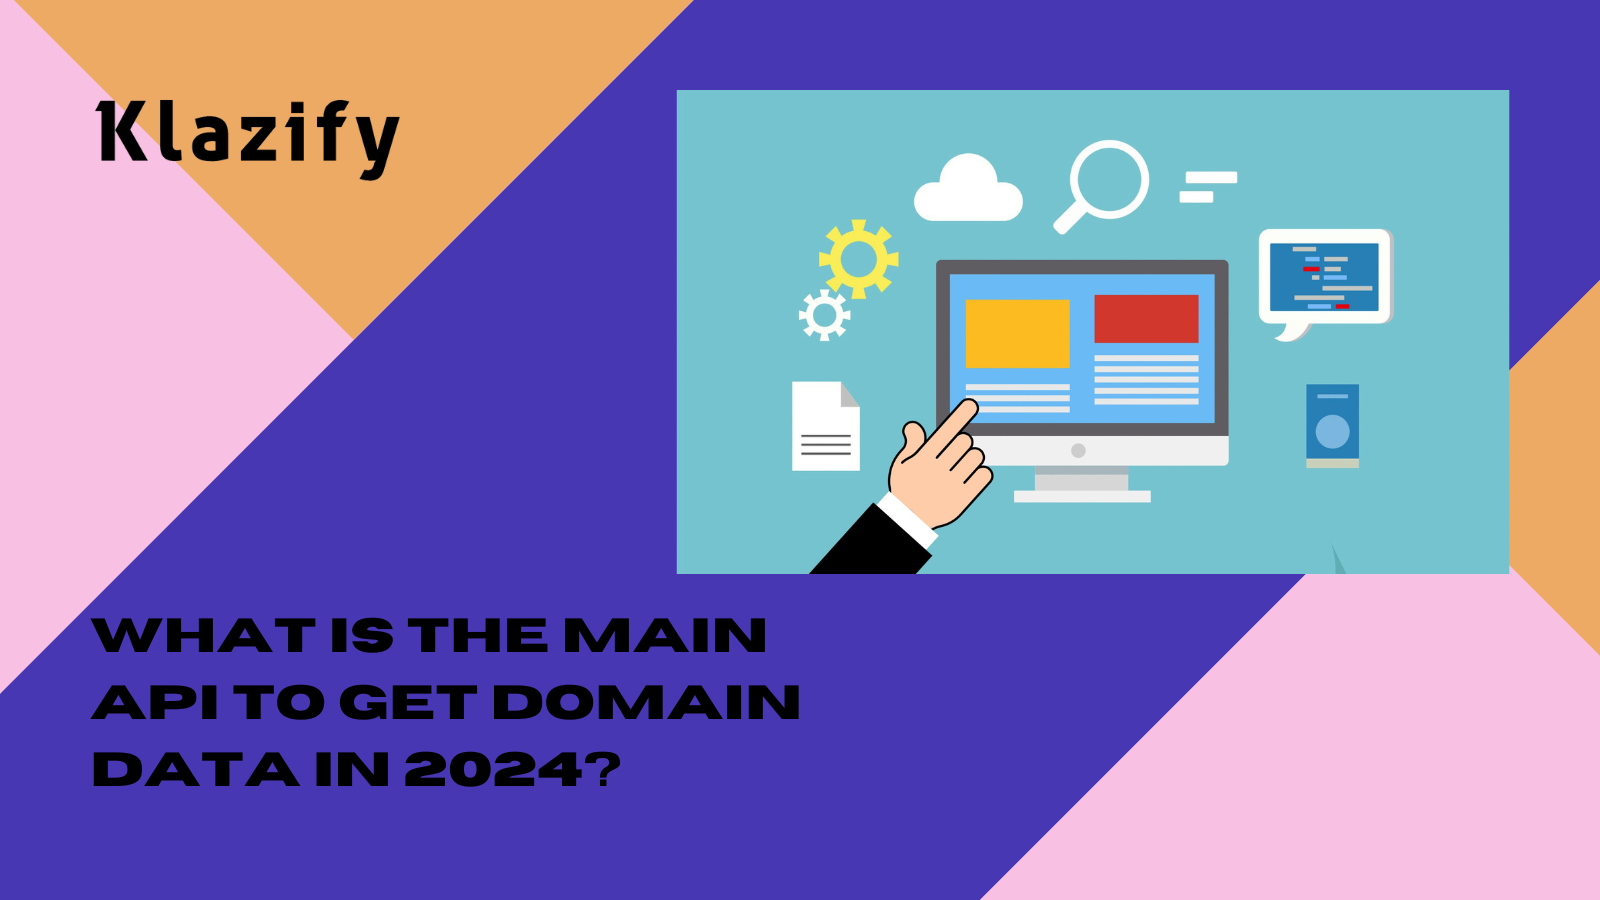 What Is The Main API To Get Domain Data In 2024?